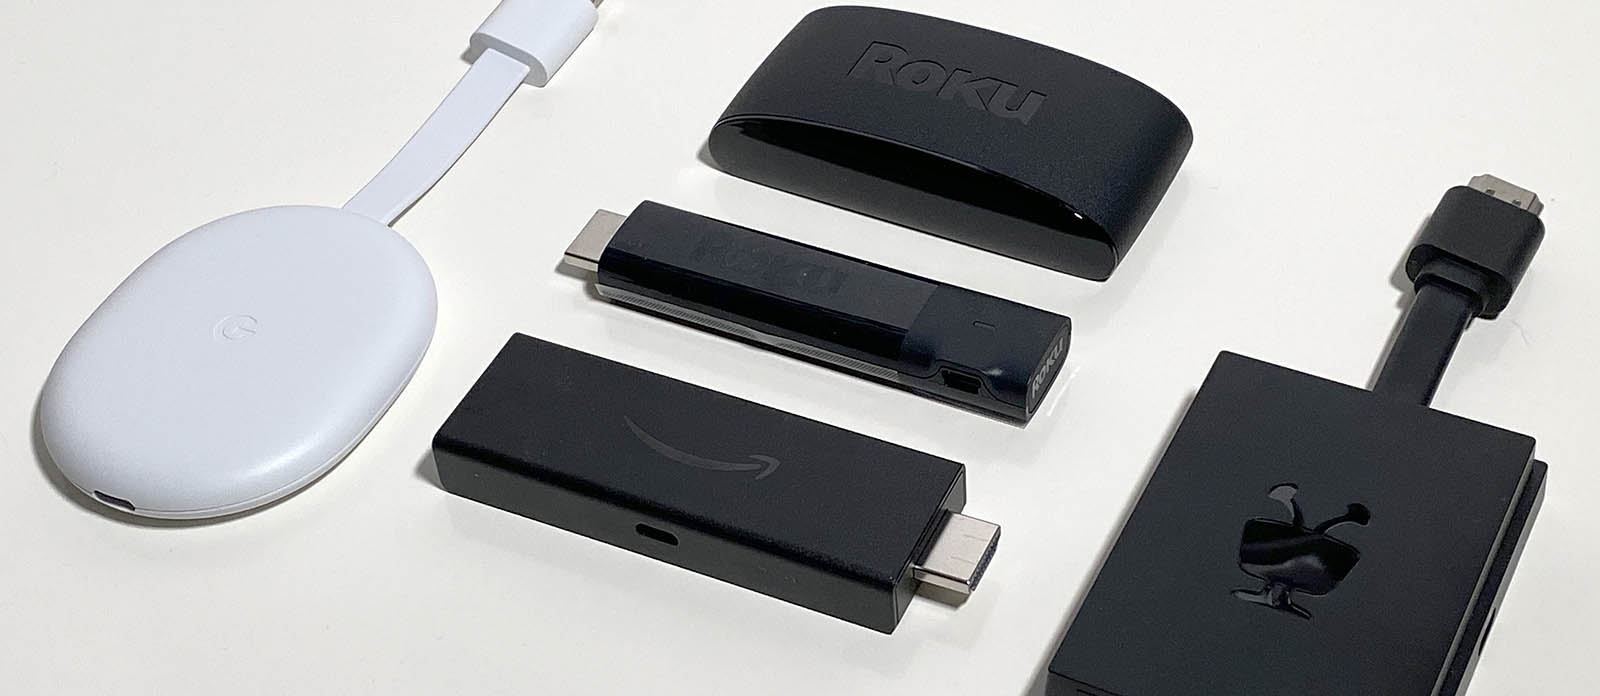 Why You Should (And Shouldn’t) Buy a Budget 4K Streaming Device